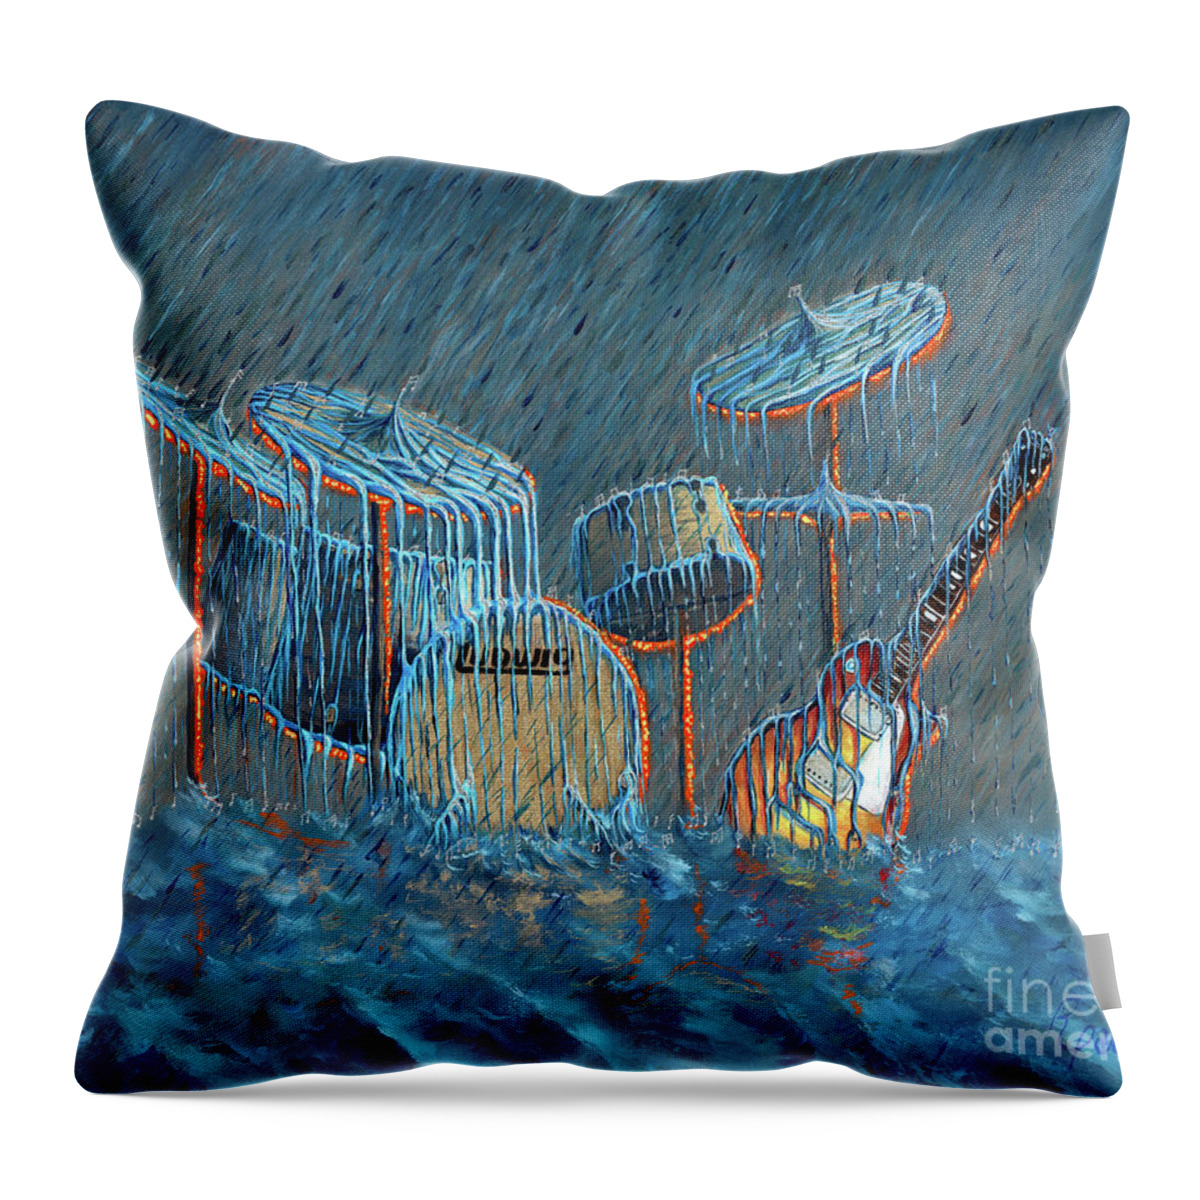 Led Throw Pillow featuring the painting When The Levee Breaks by Rebecca Parker